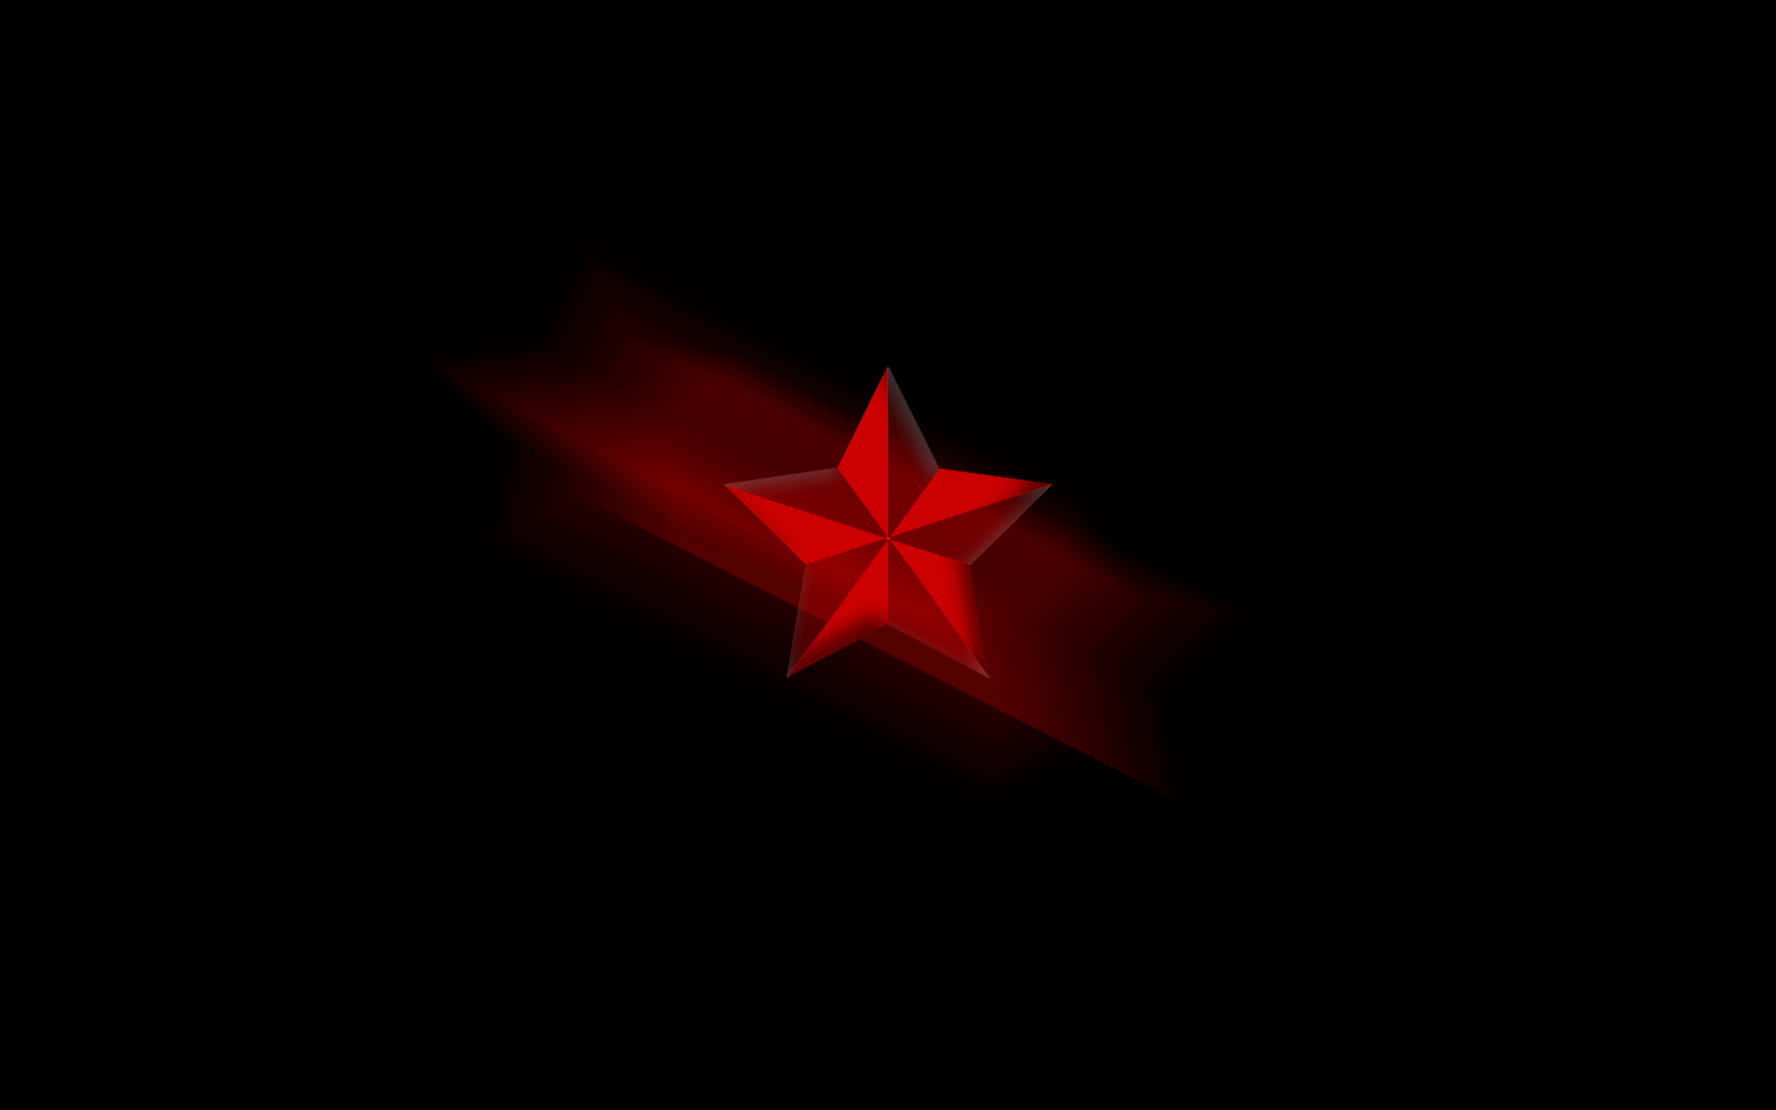 Red Star Shining Brightly Against a Black Background